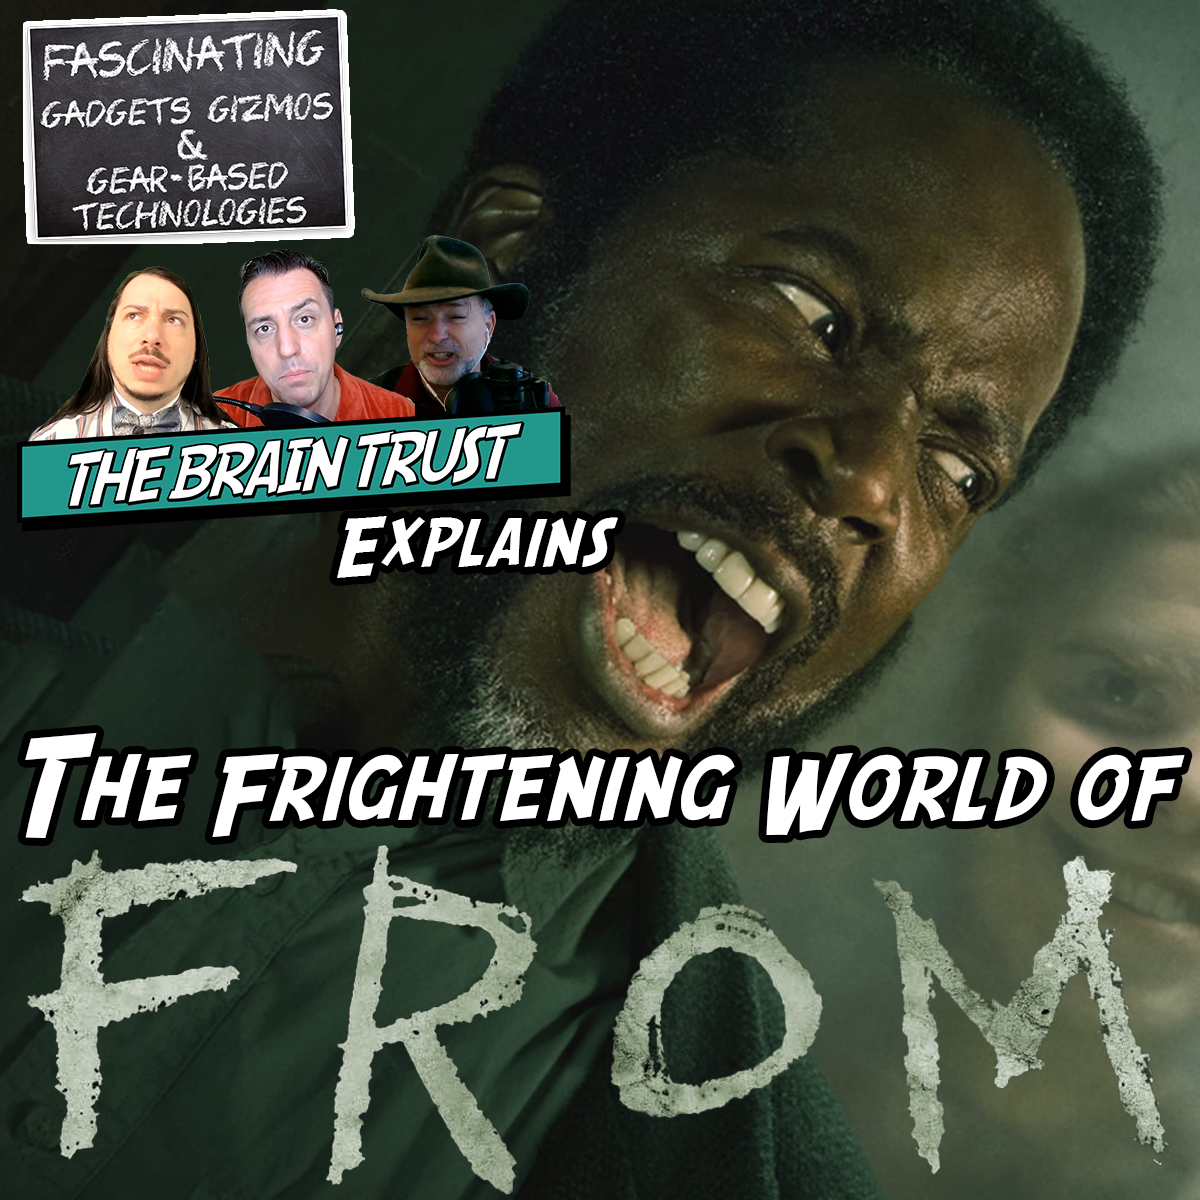 You are currently viewing Ep. 157 The Frightening World of FROM